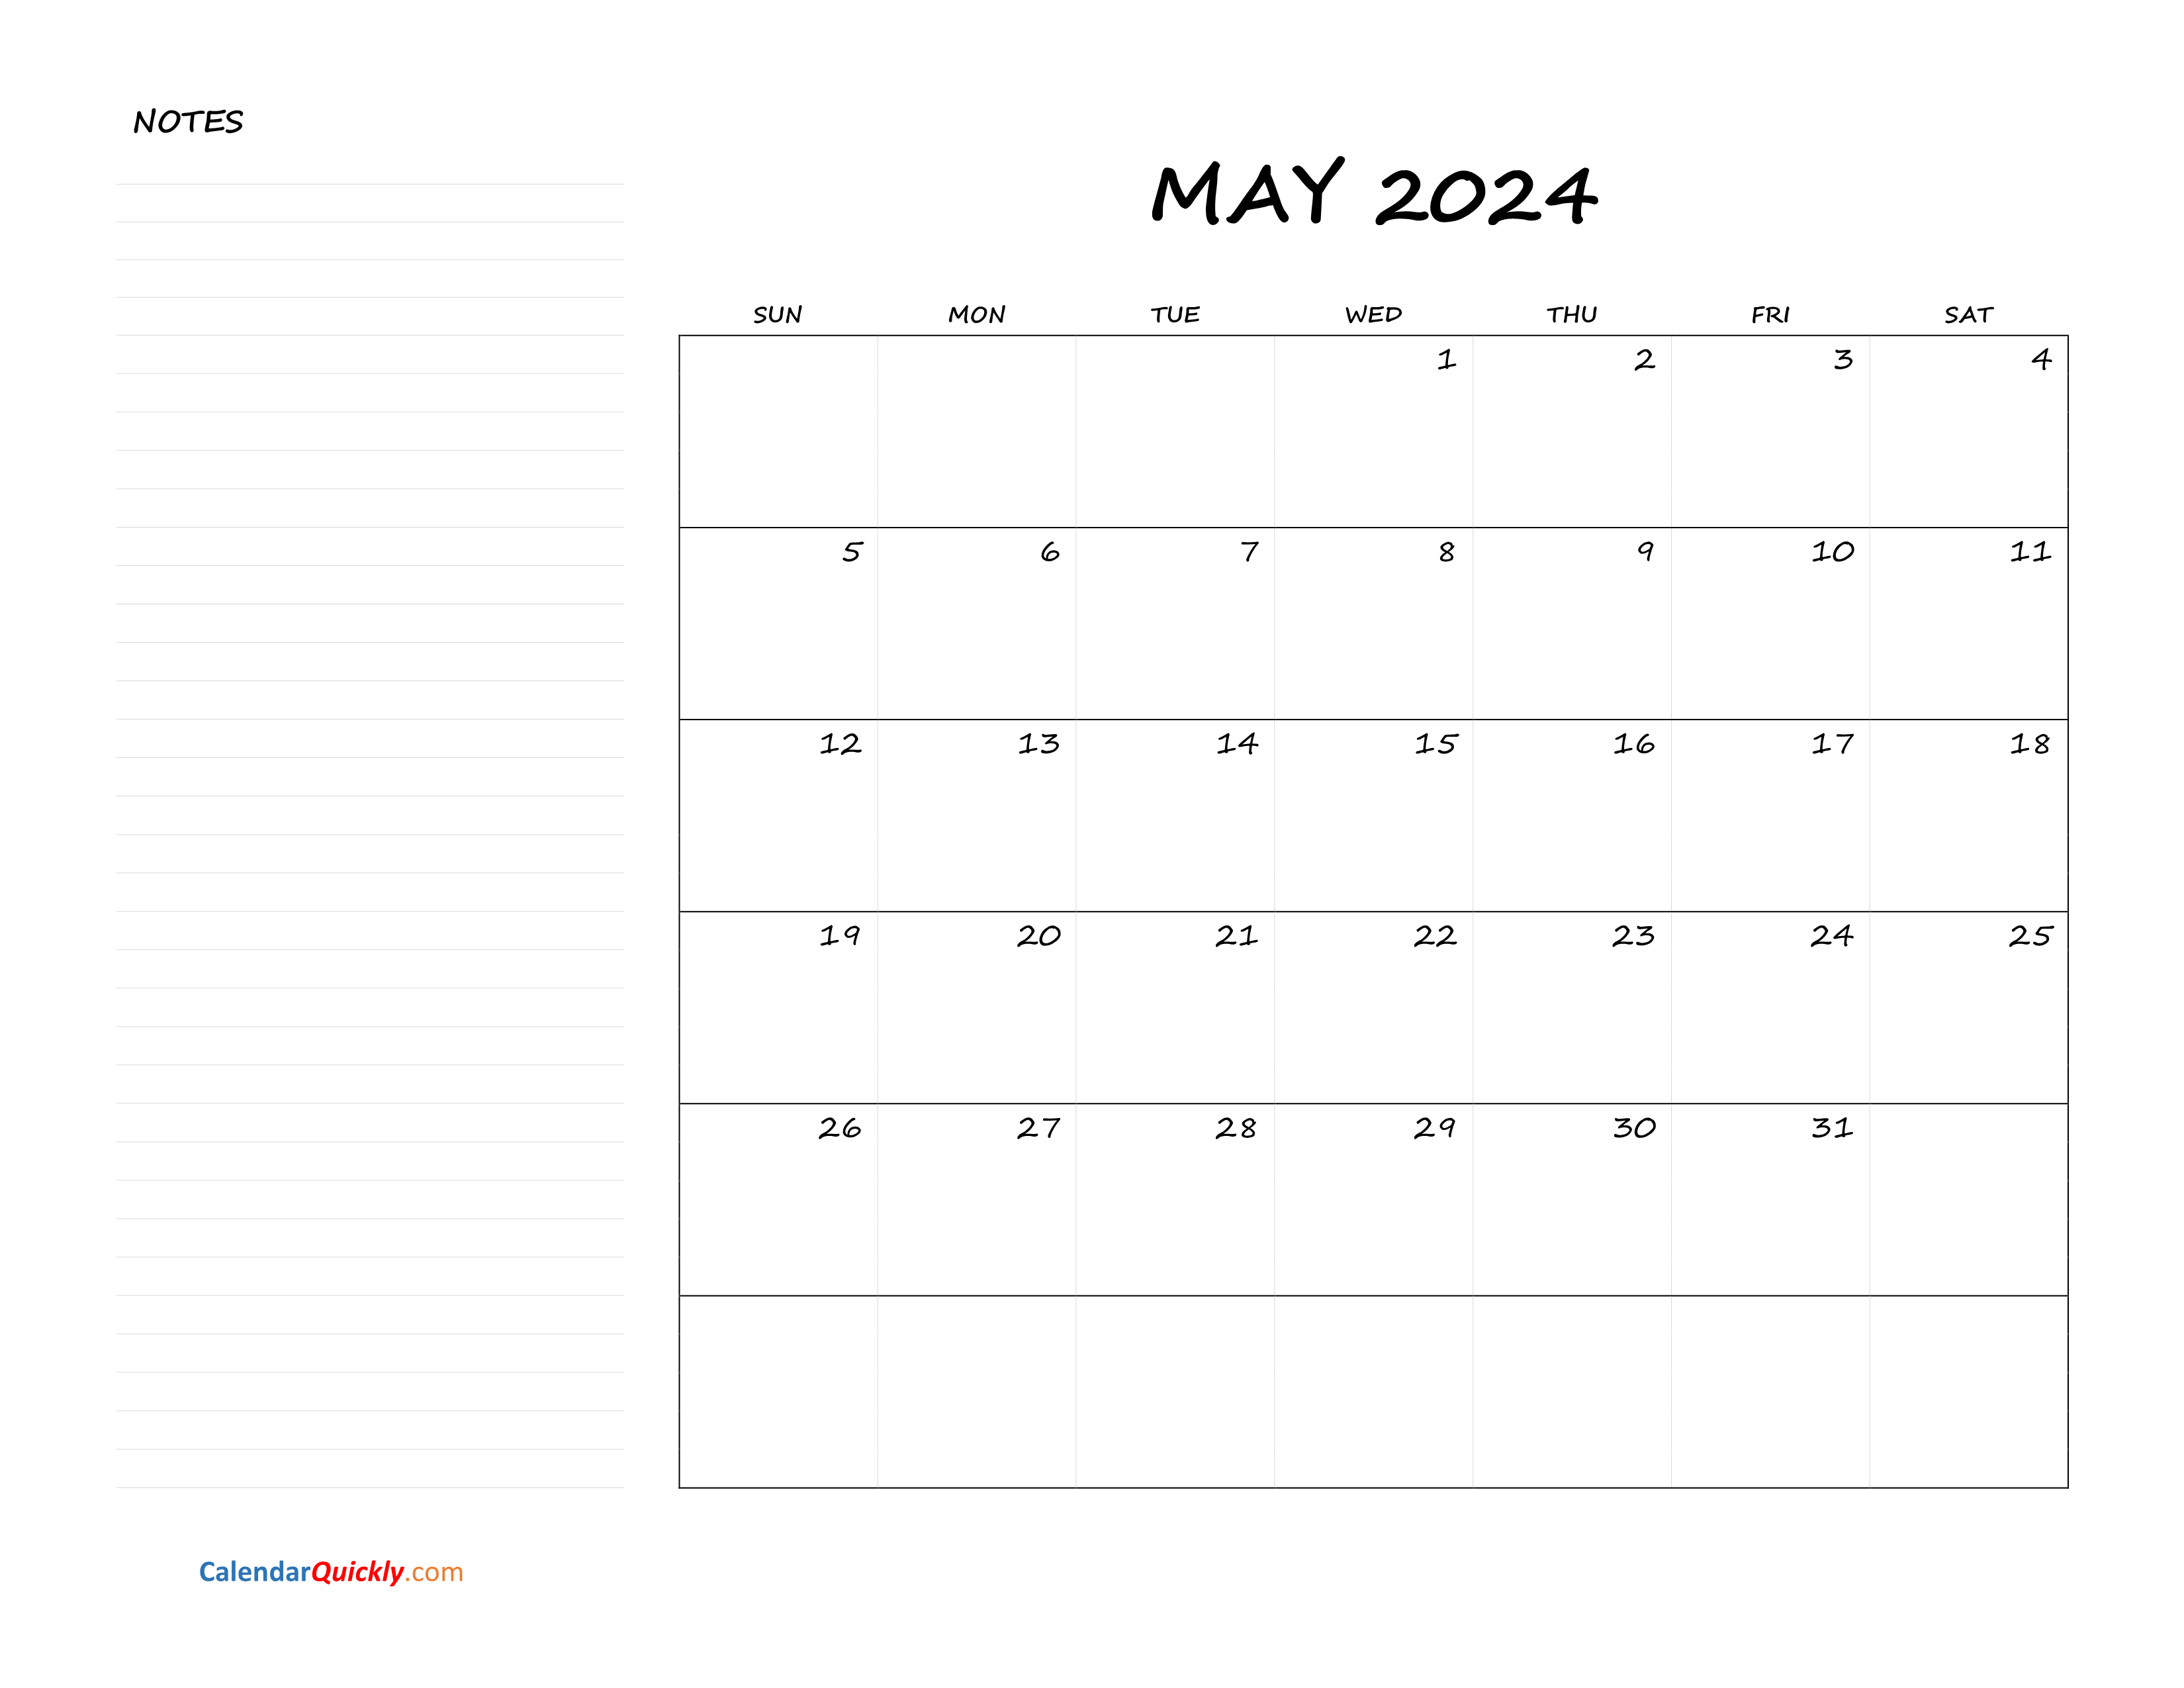 may-blank-calendar-2024-with-notes-calendar-quickly